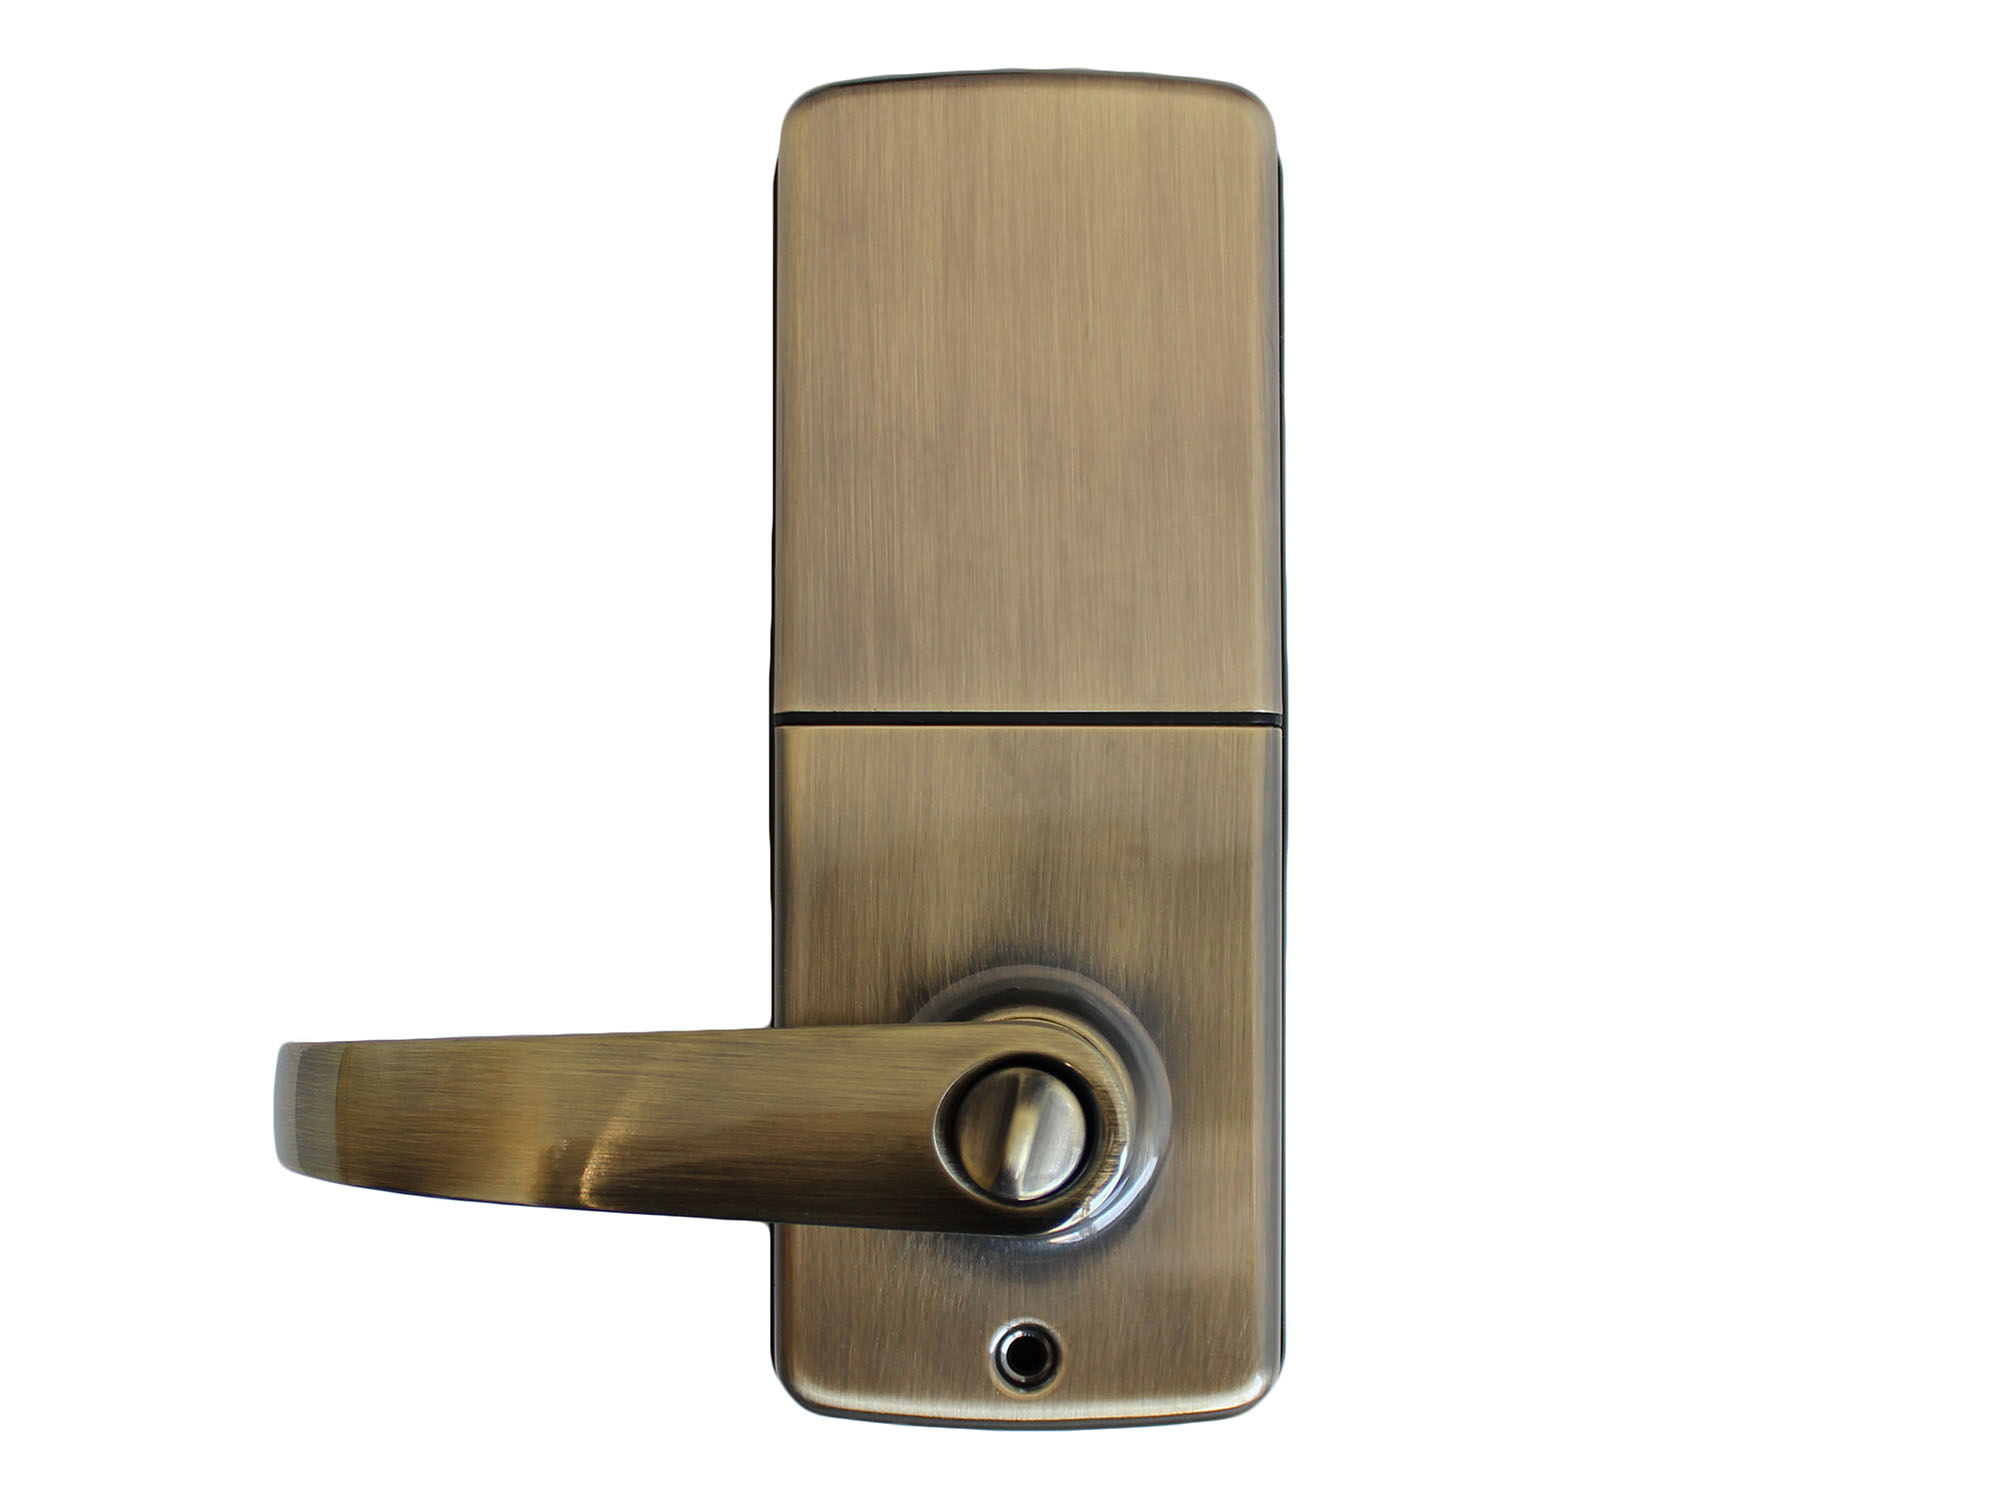 Lockey E995 Electronic Lever-Handle Latchbolt Lock with Lighted Keypad - Click Image to Close